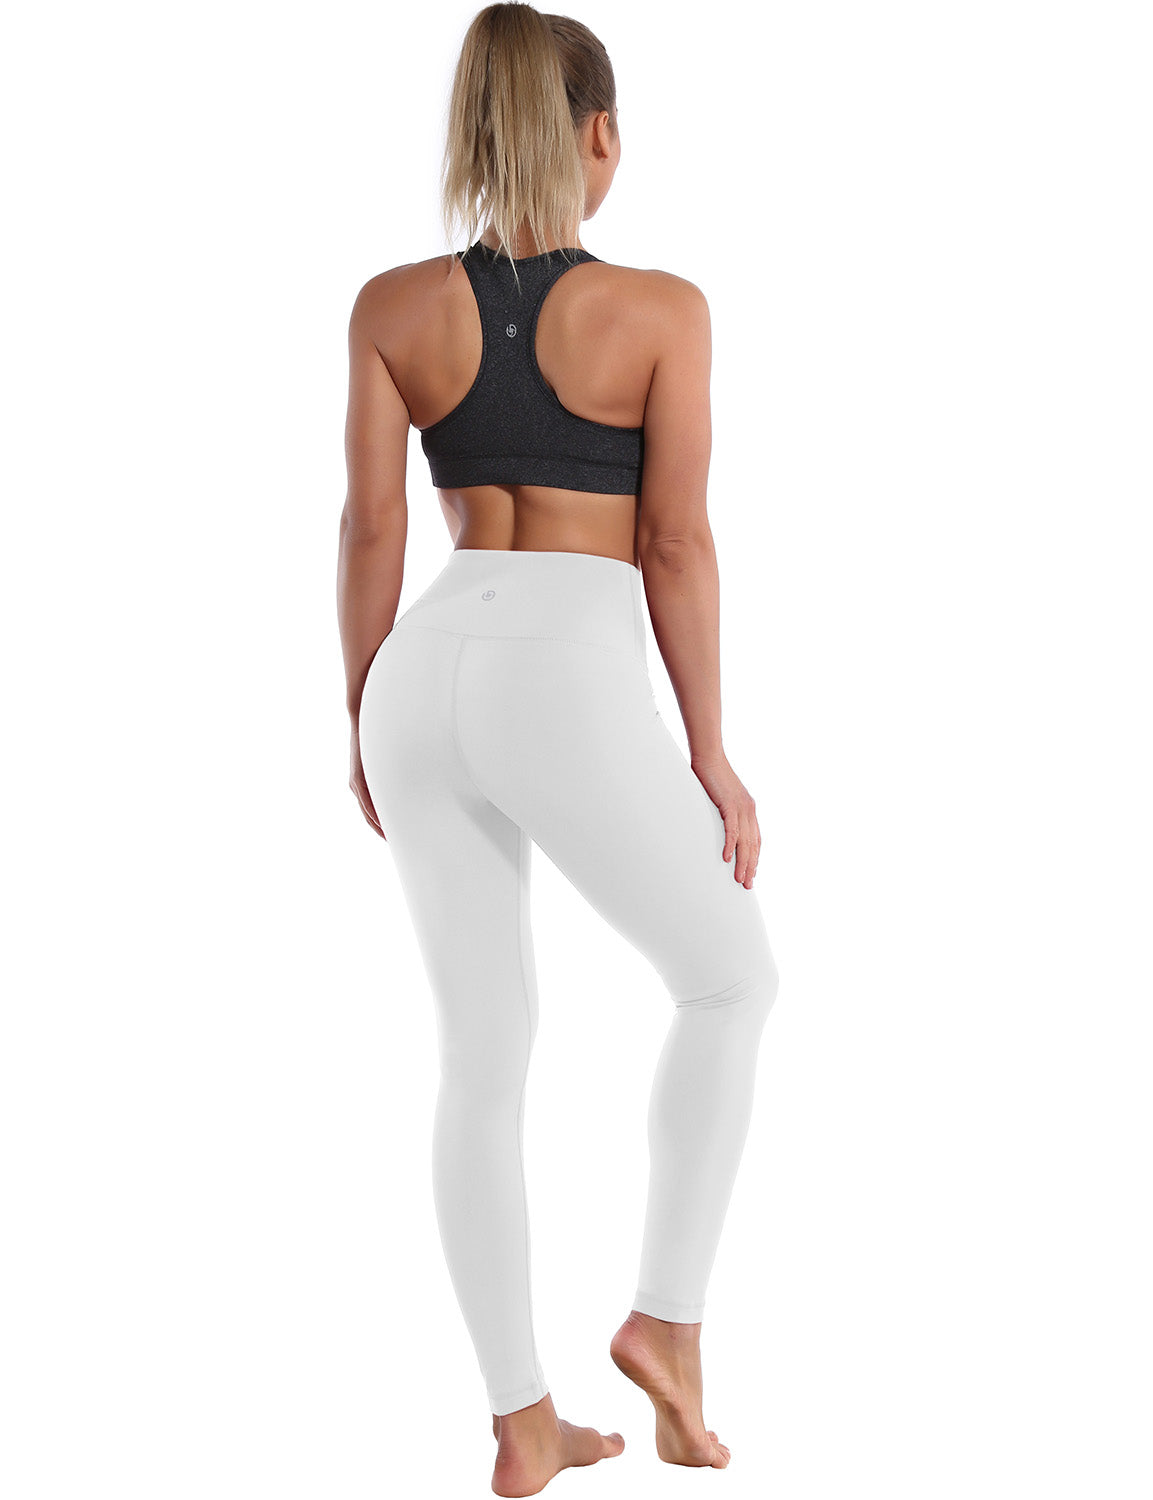 High Waist Pilates Pants white 75%Nylon/25%Spandex Fabric doesn't attract lint easily 4-way stretch No see-through Moisture-wicking Tummy control Inner pocket Four lengths